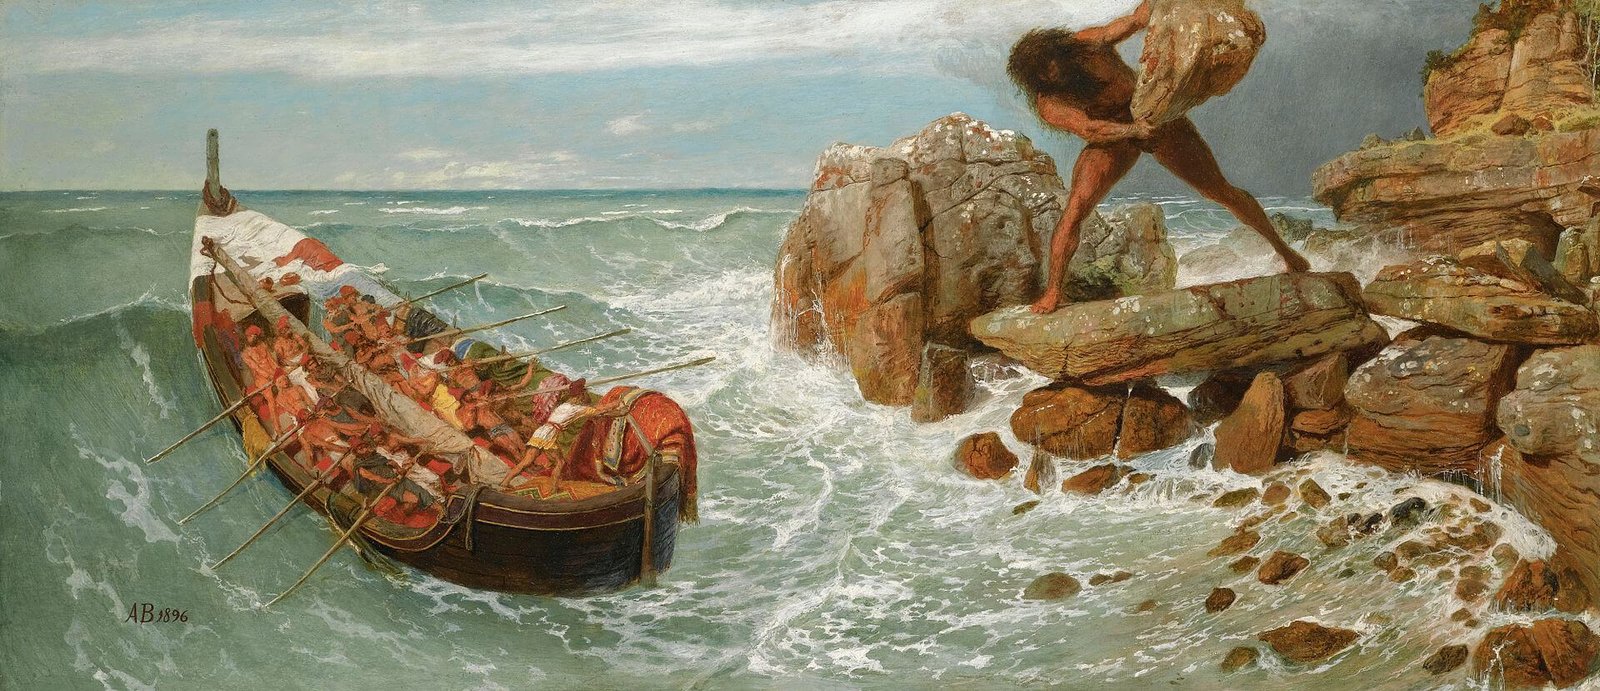 This painting represents the giant Polyphemus throwing an enormous rock at the boat with Ulysses and his crew.